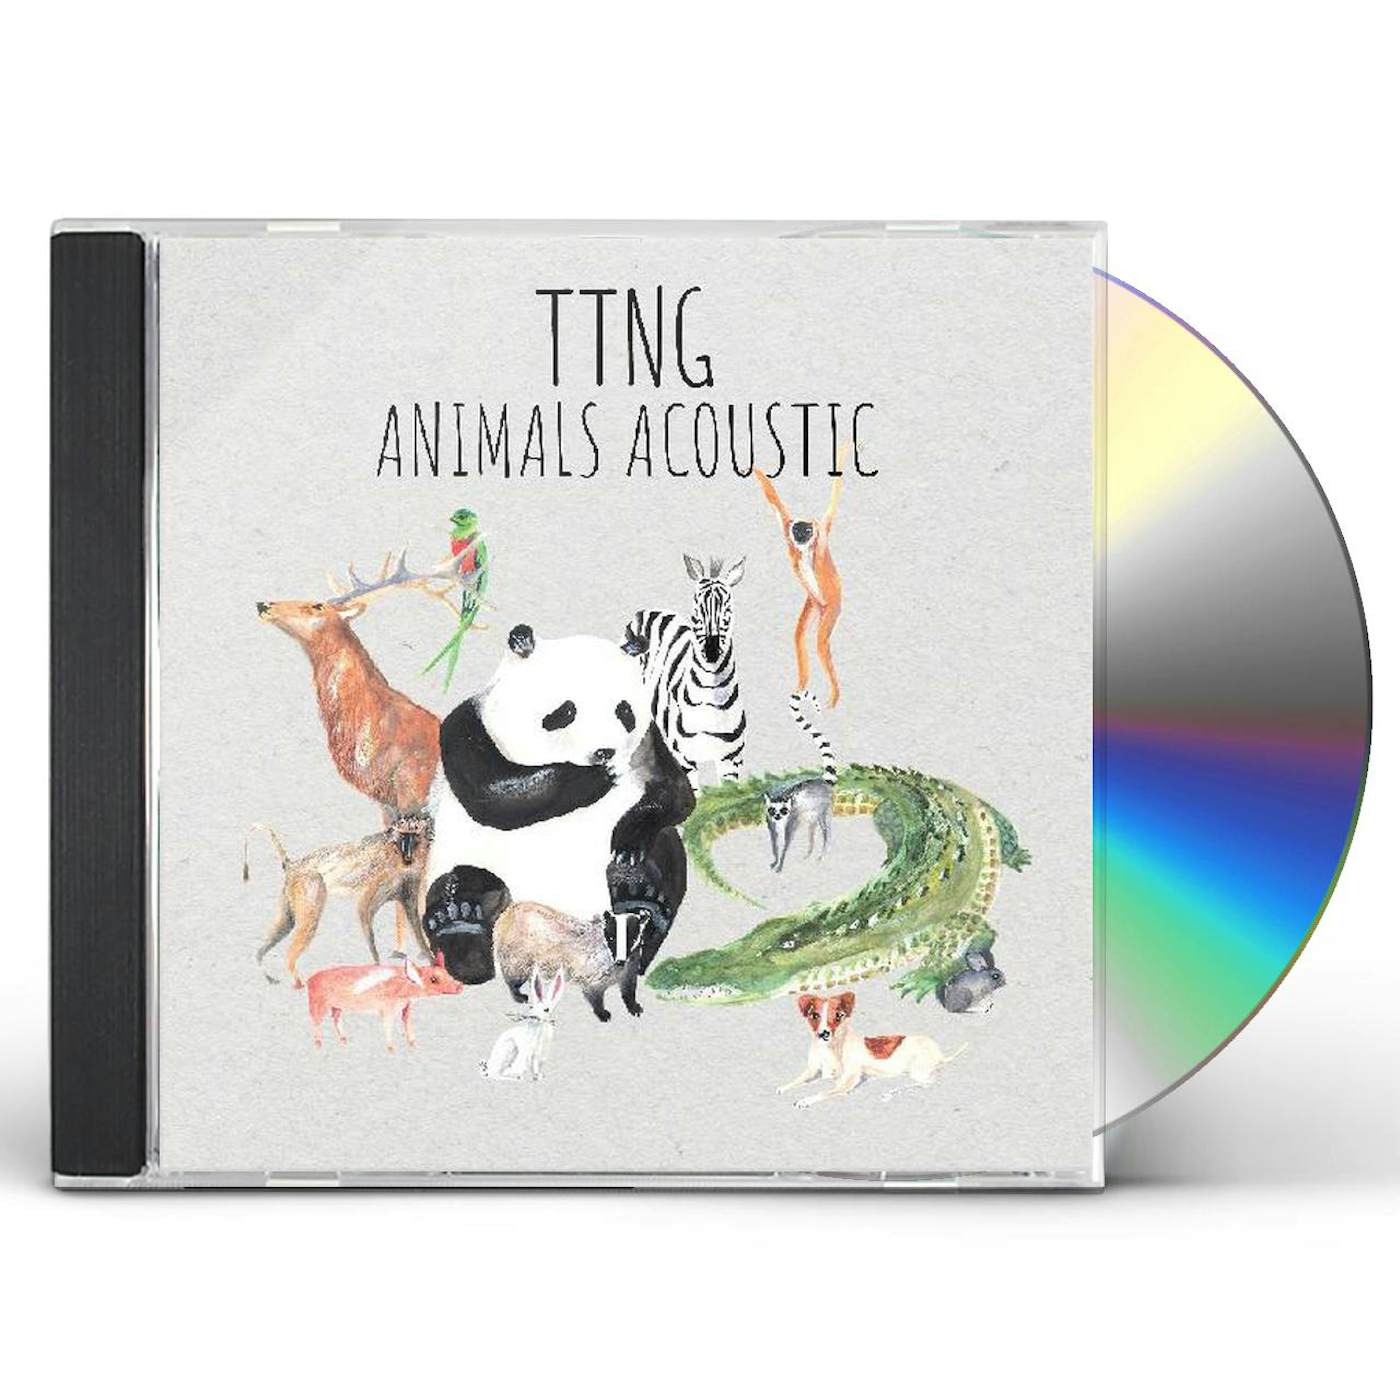 TTNG ANIMALS ACOUSTIC CD